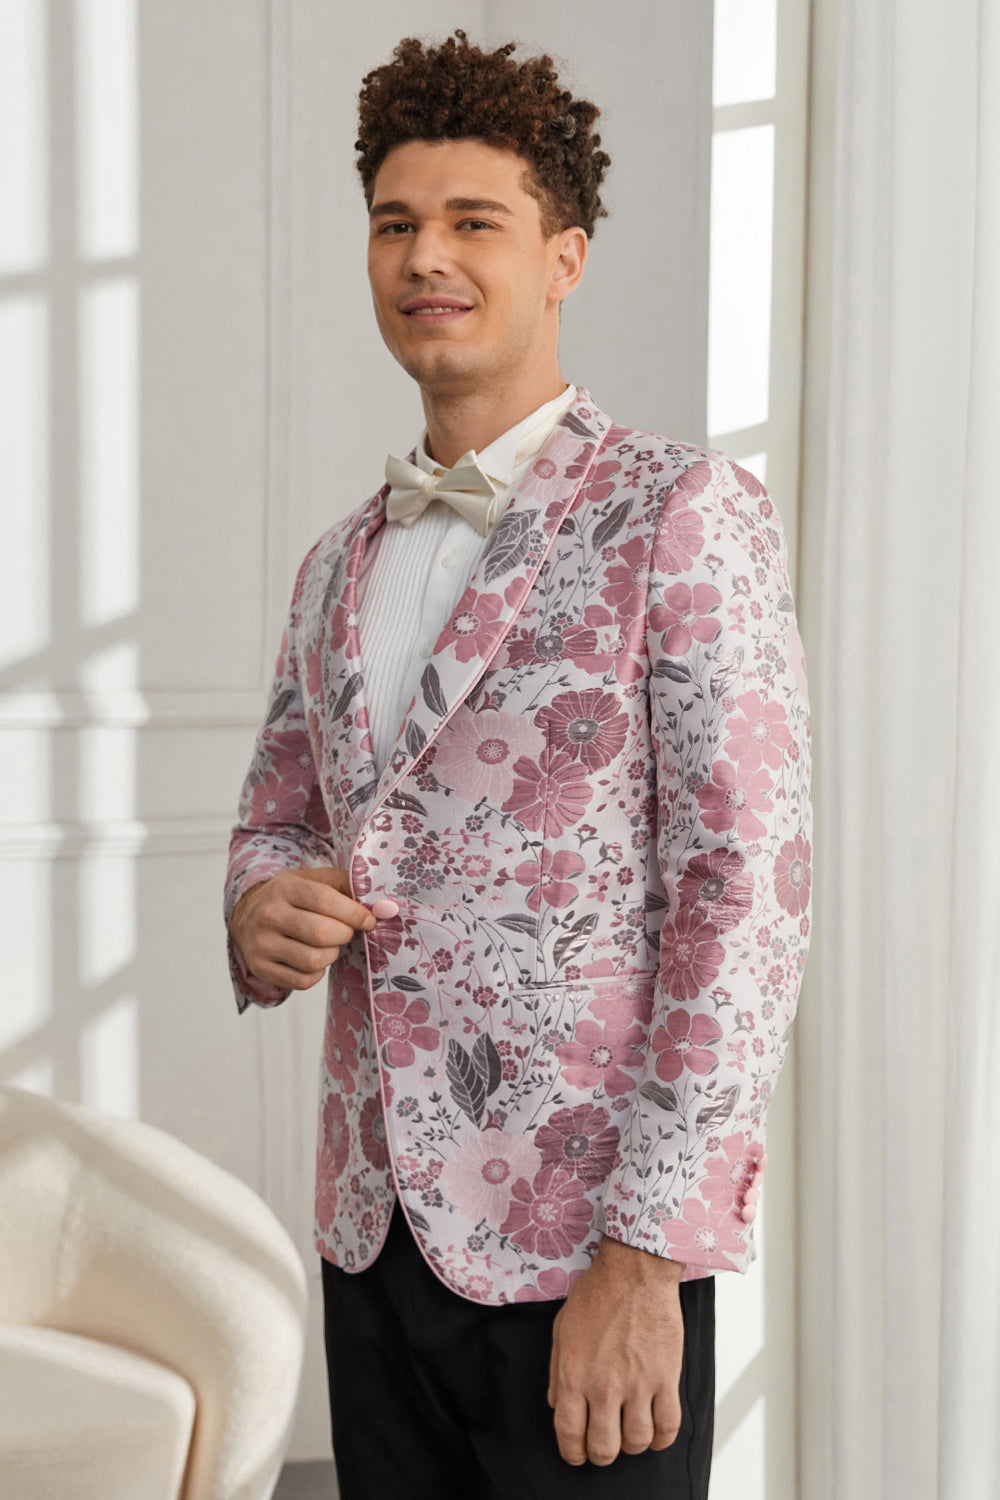 Shawl Lapel One Button Pink Floral Jacquard 2 Piece Homecoming Suits